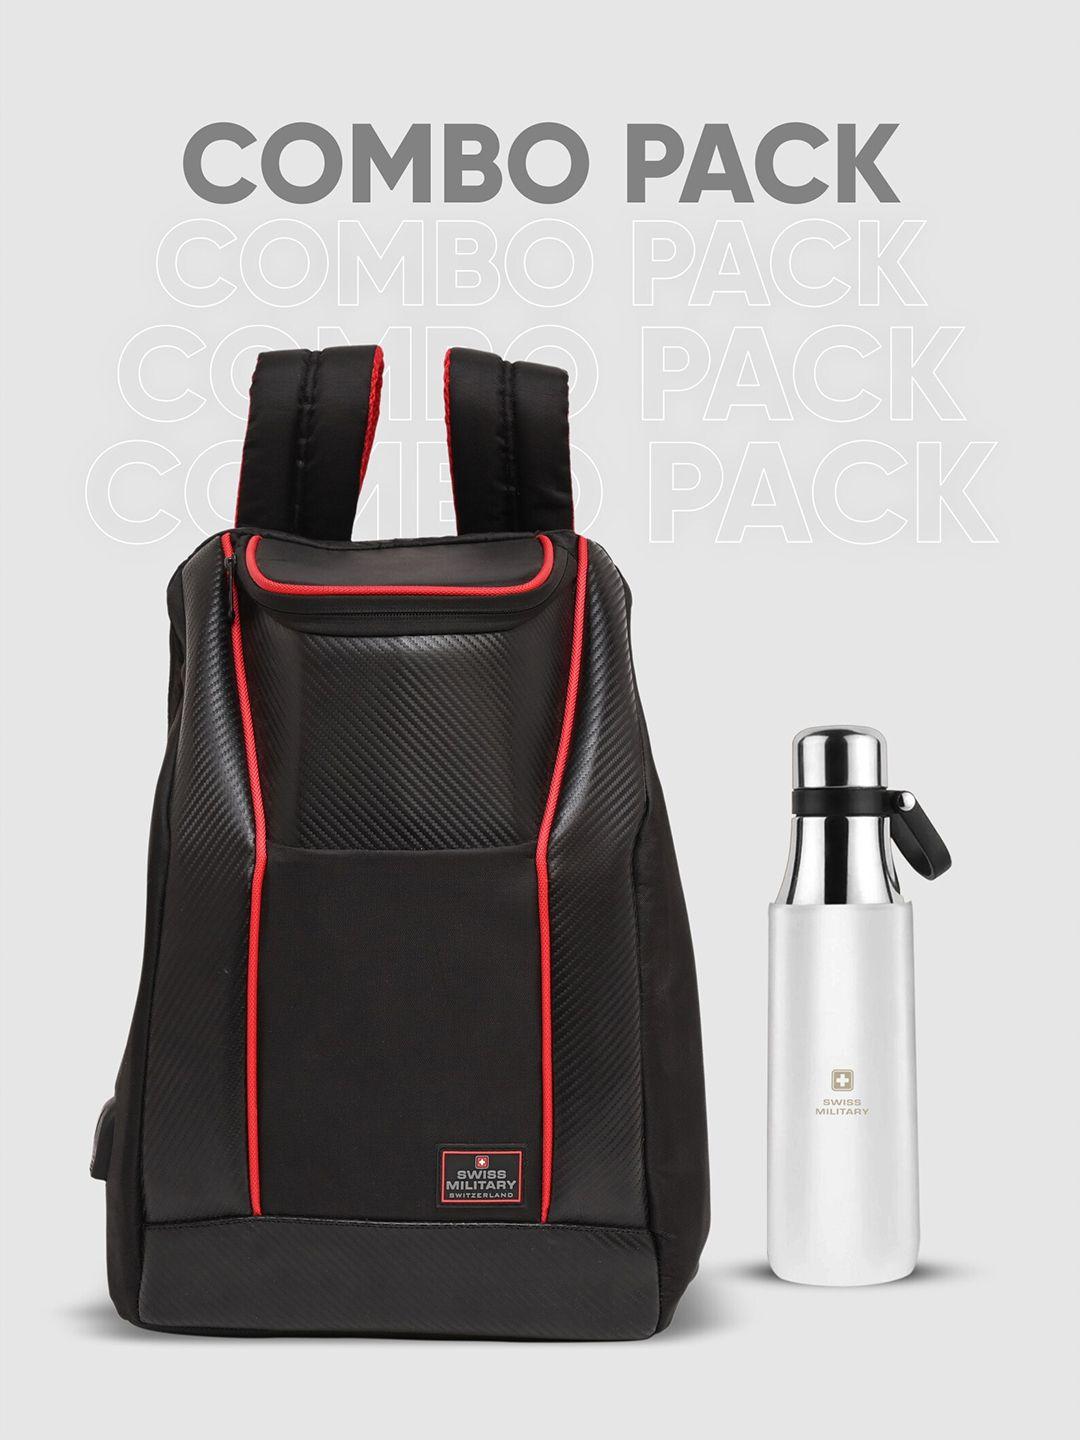 swiss military unisex backpack and vacuum flask